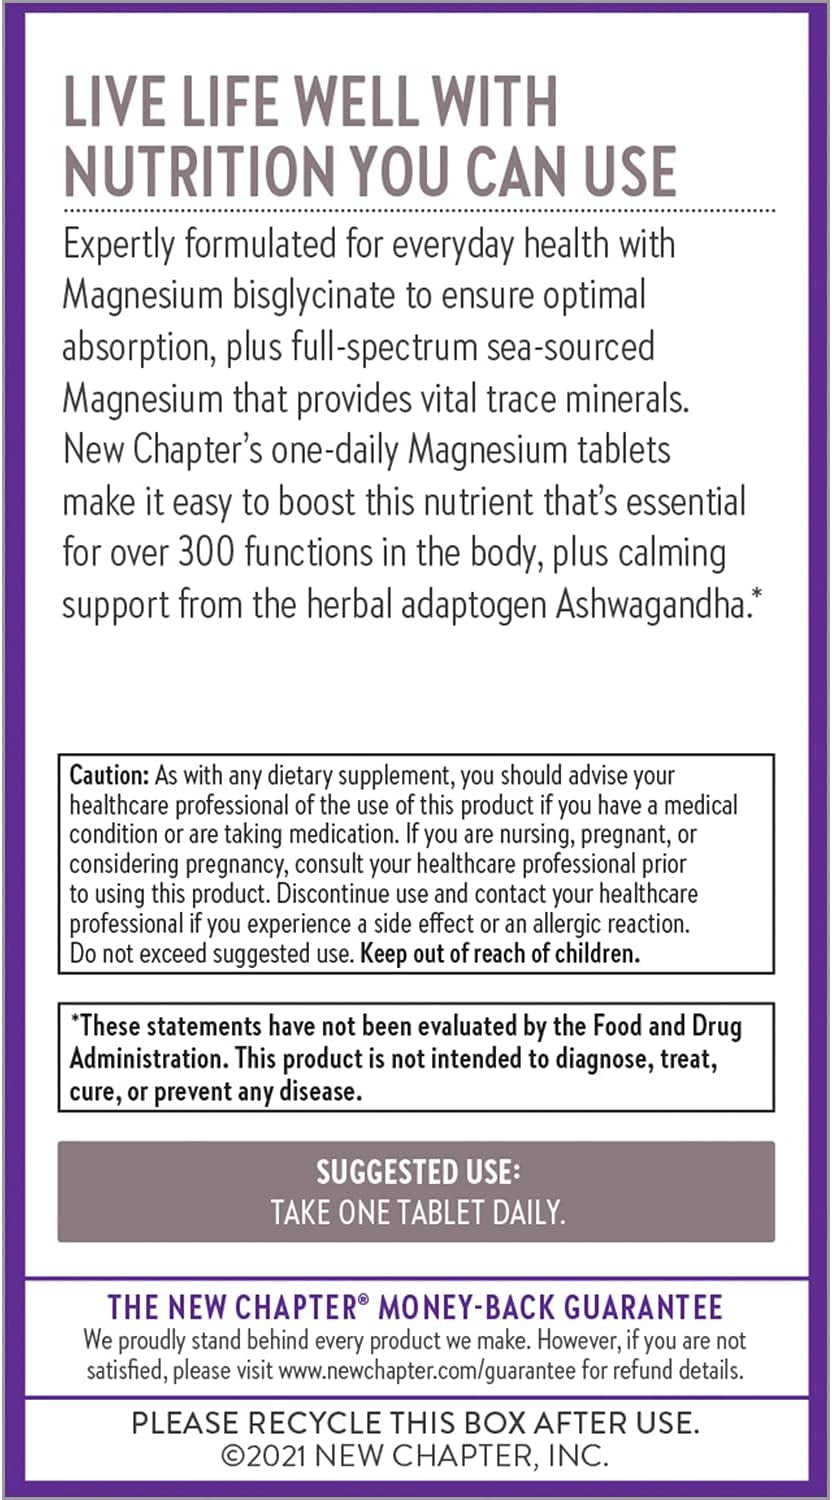 "Boost Muscle Recovery and Relaxation with New Chapter Magnesium + Ashwagandha - Gluten Free, Non-GMO - 30 Count"